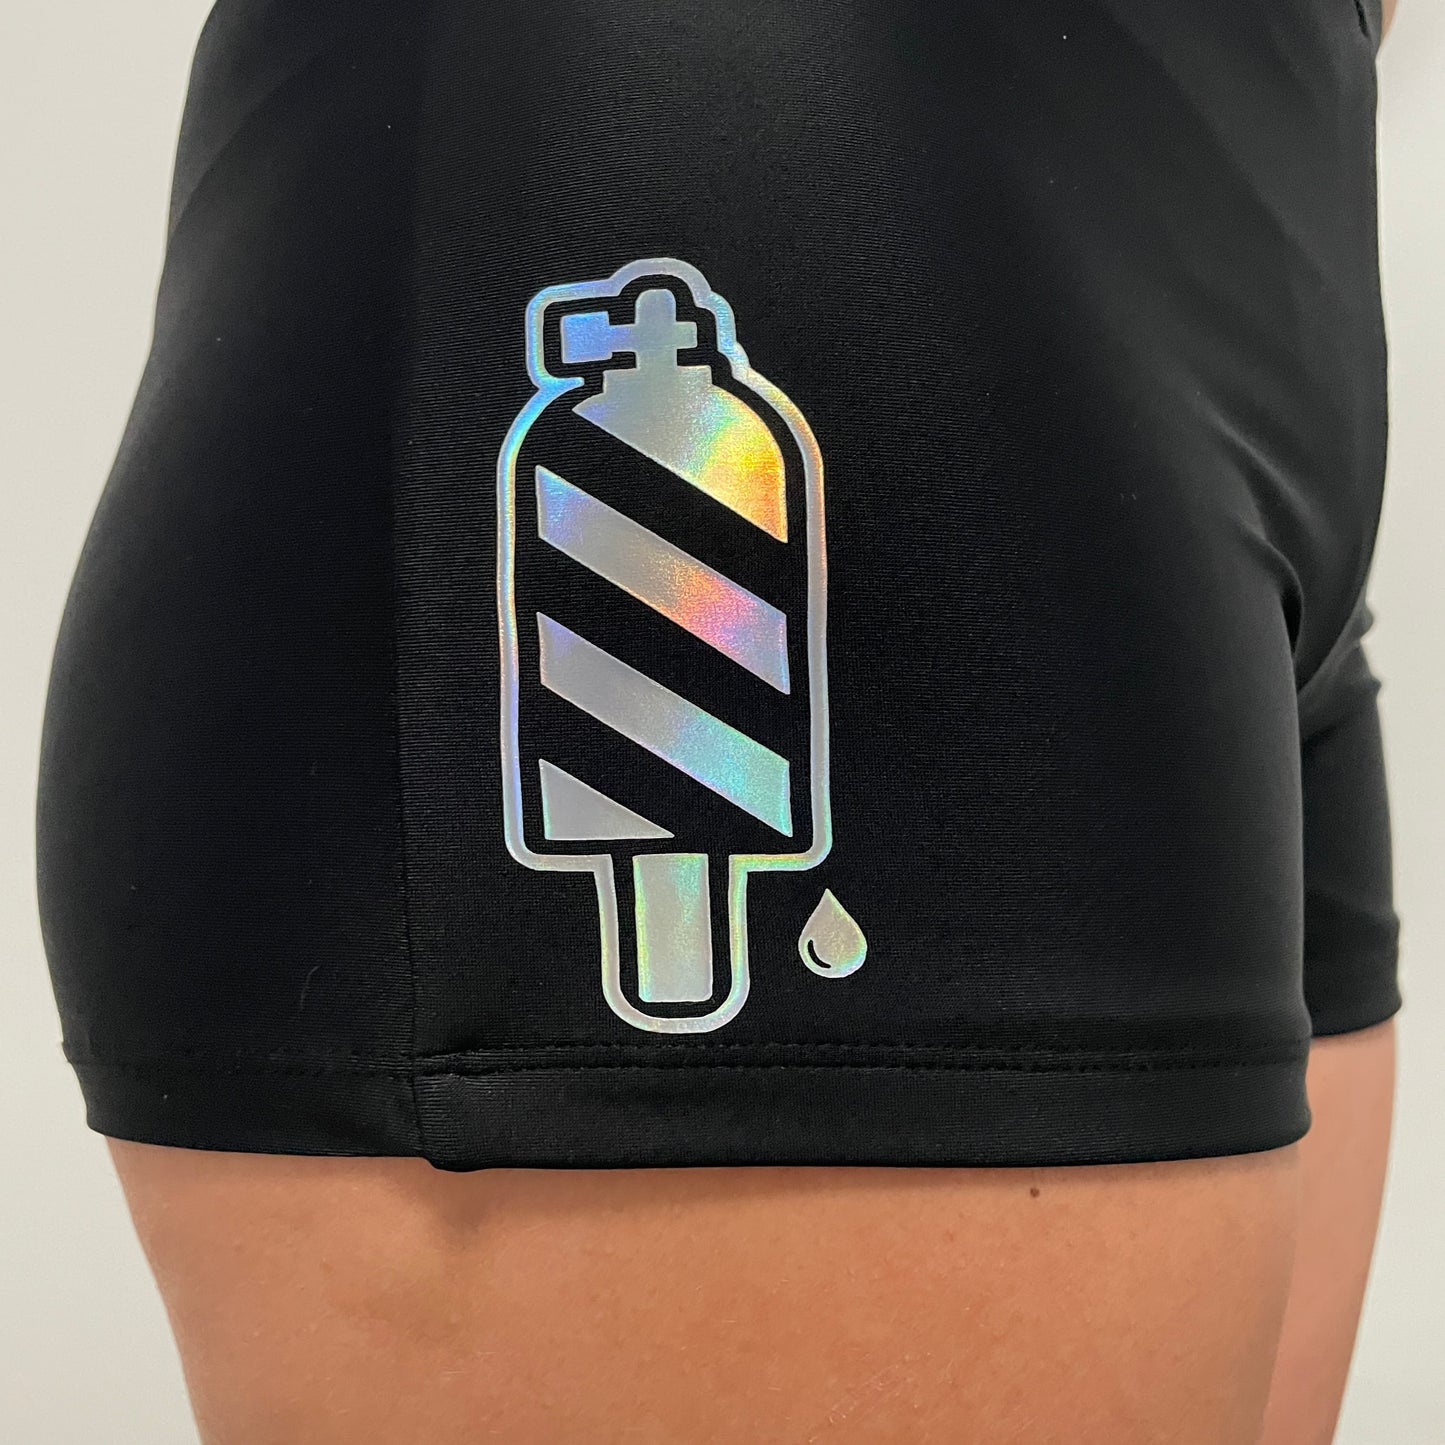 Shorts for scuba divers - with iridescent sweeter tank art